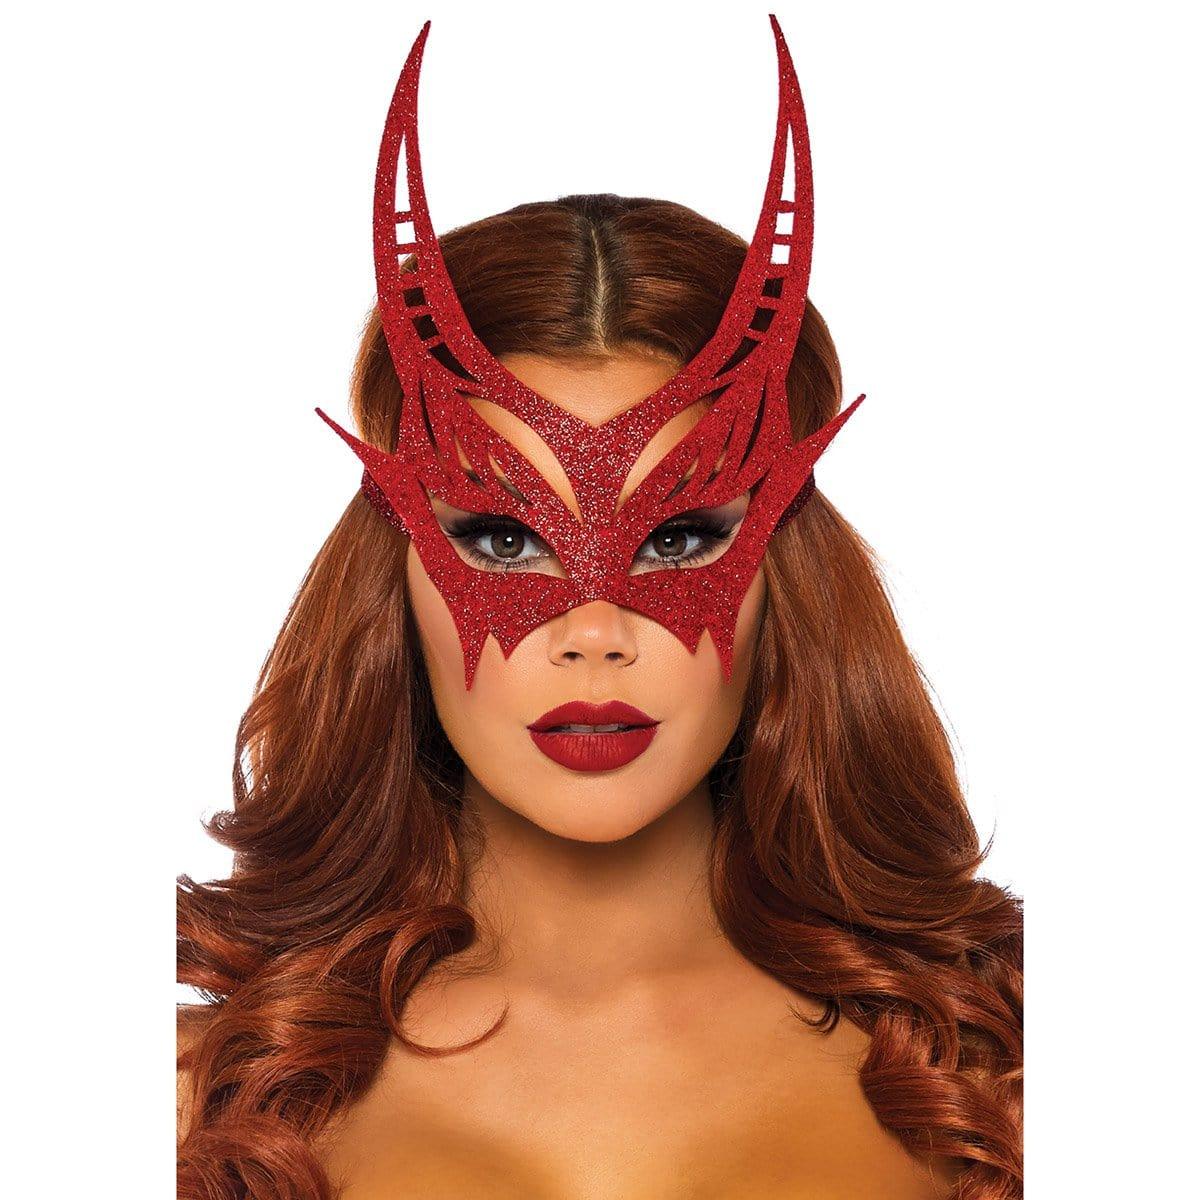 Buy Costume Accessories Red glitter devil mask sold at Party Expert